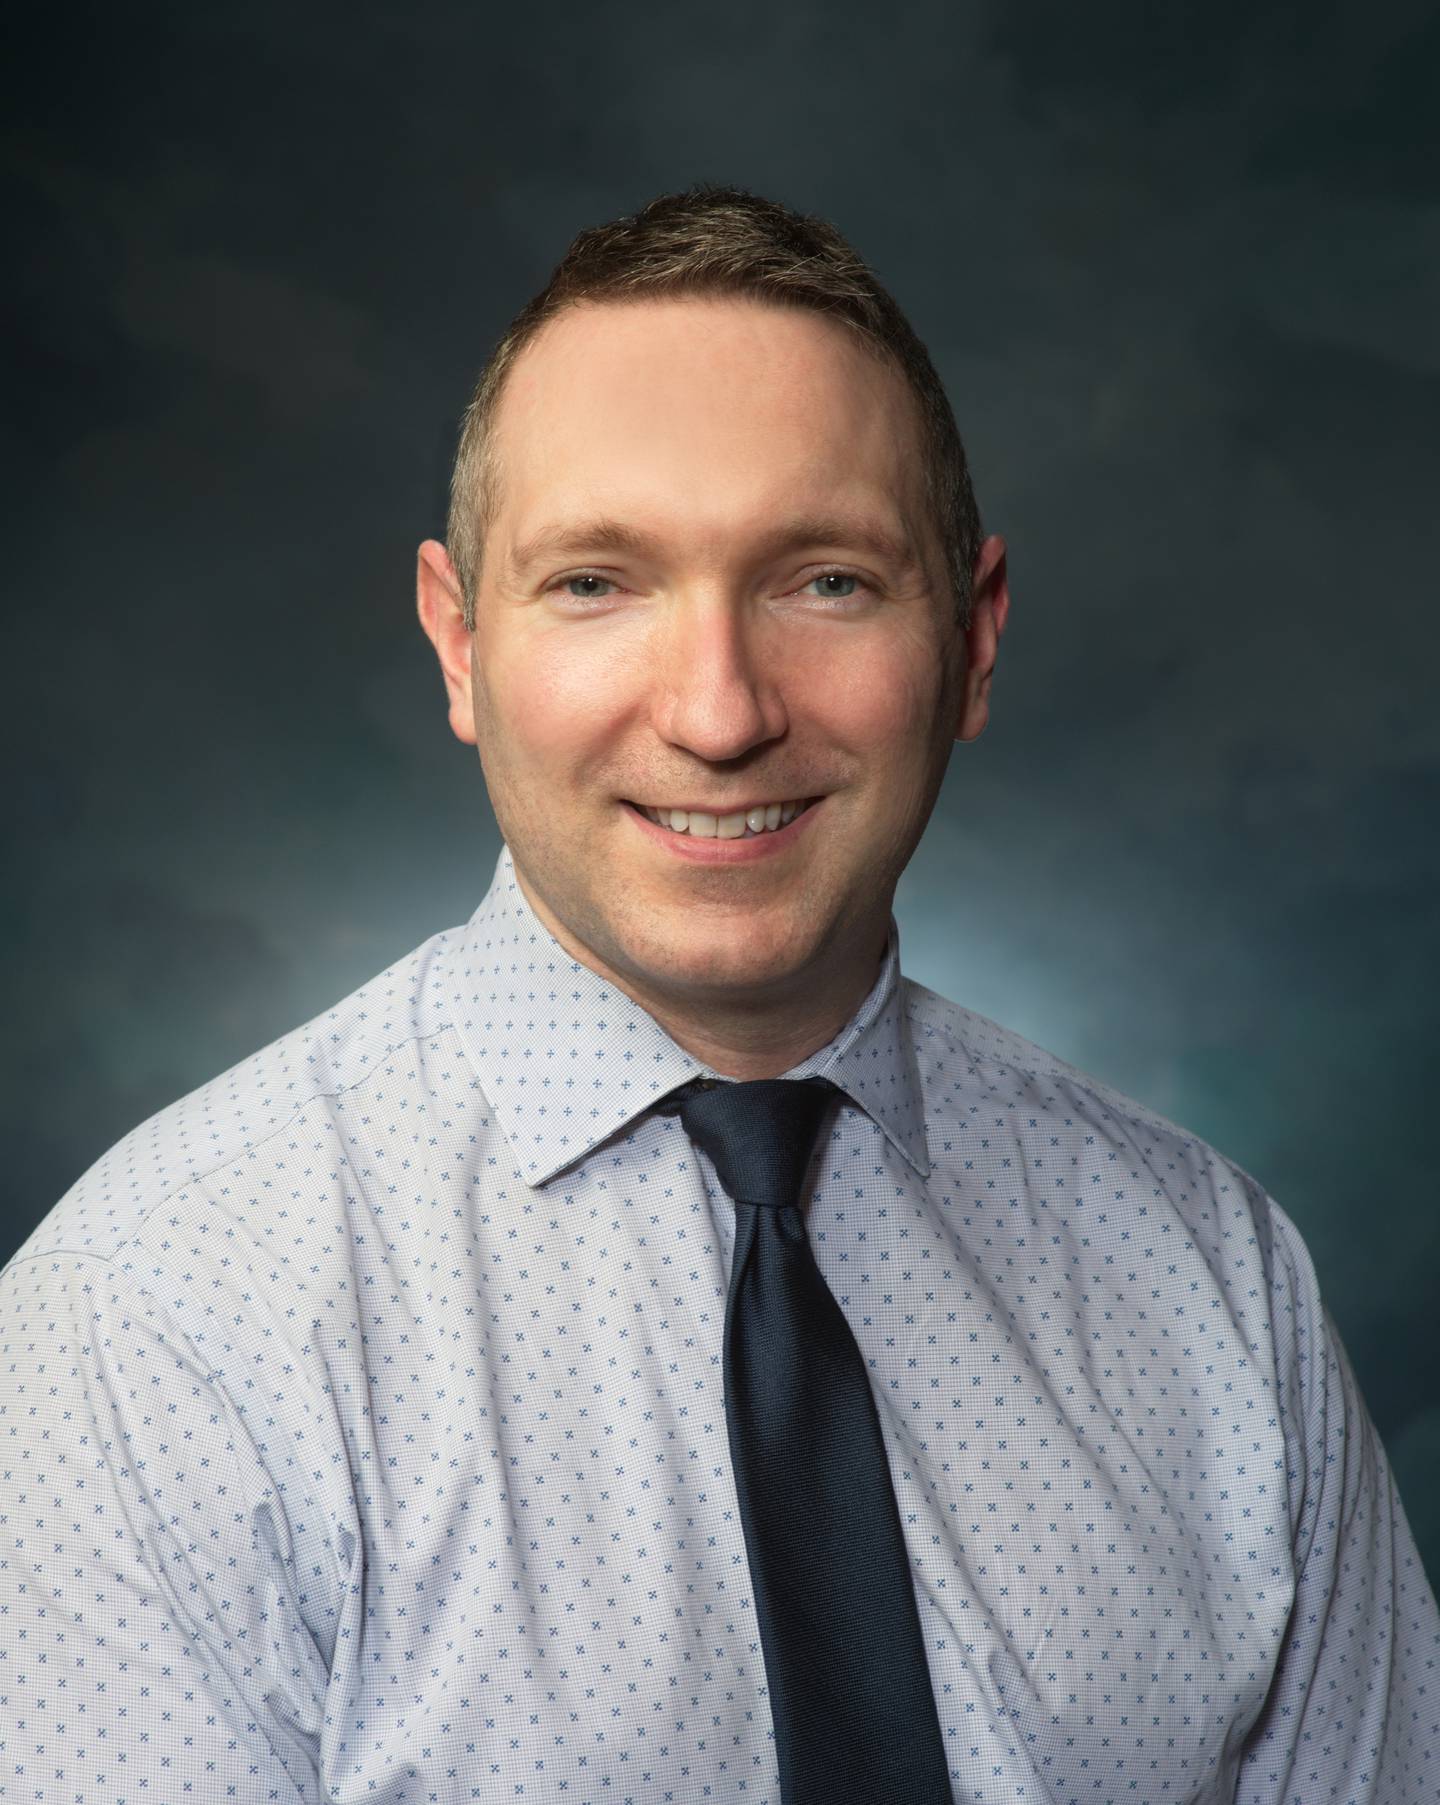 Edward Kessler, MD, a critical care medicine physician and pulmonologist who specializes in interventional pulmonology, has joined Edward-Elmhurst Medical Group and is seeing patients at 100 Spalding Dr. on the campus of Edward Hospital in Naperville